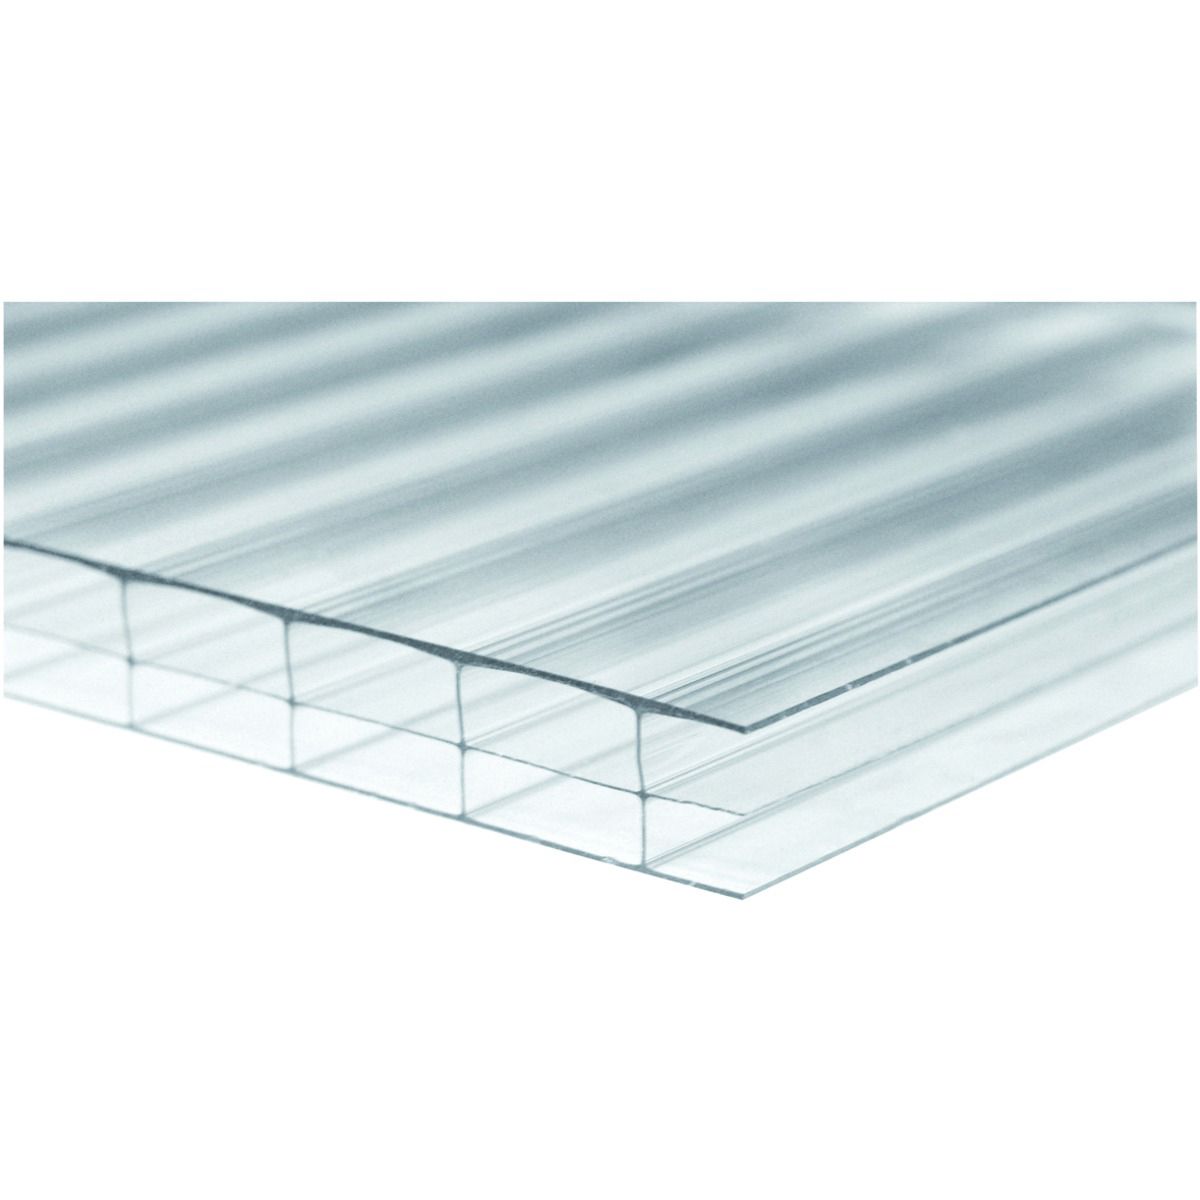 Image of Wickes 16mm Triplewall Polycarbonate Sheet - 980 X 4000mm